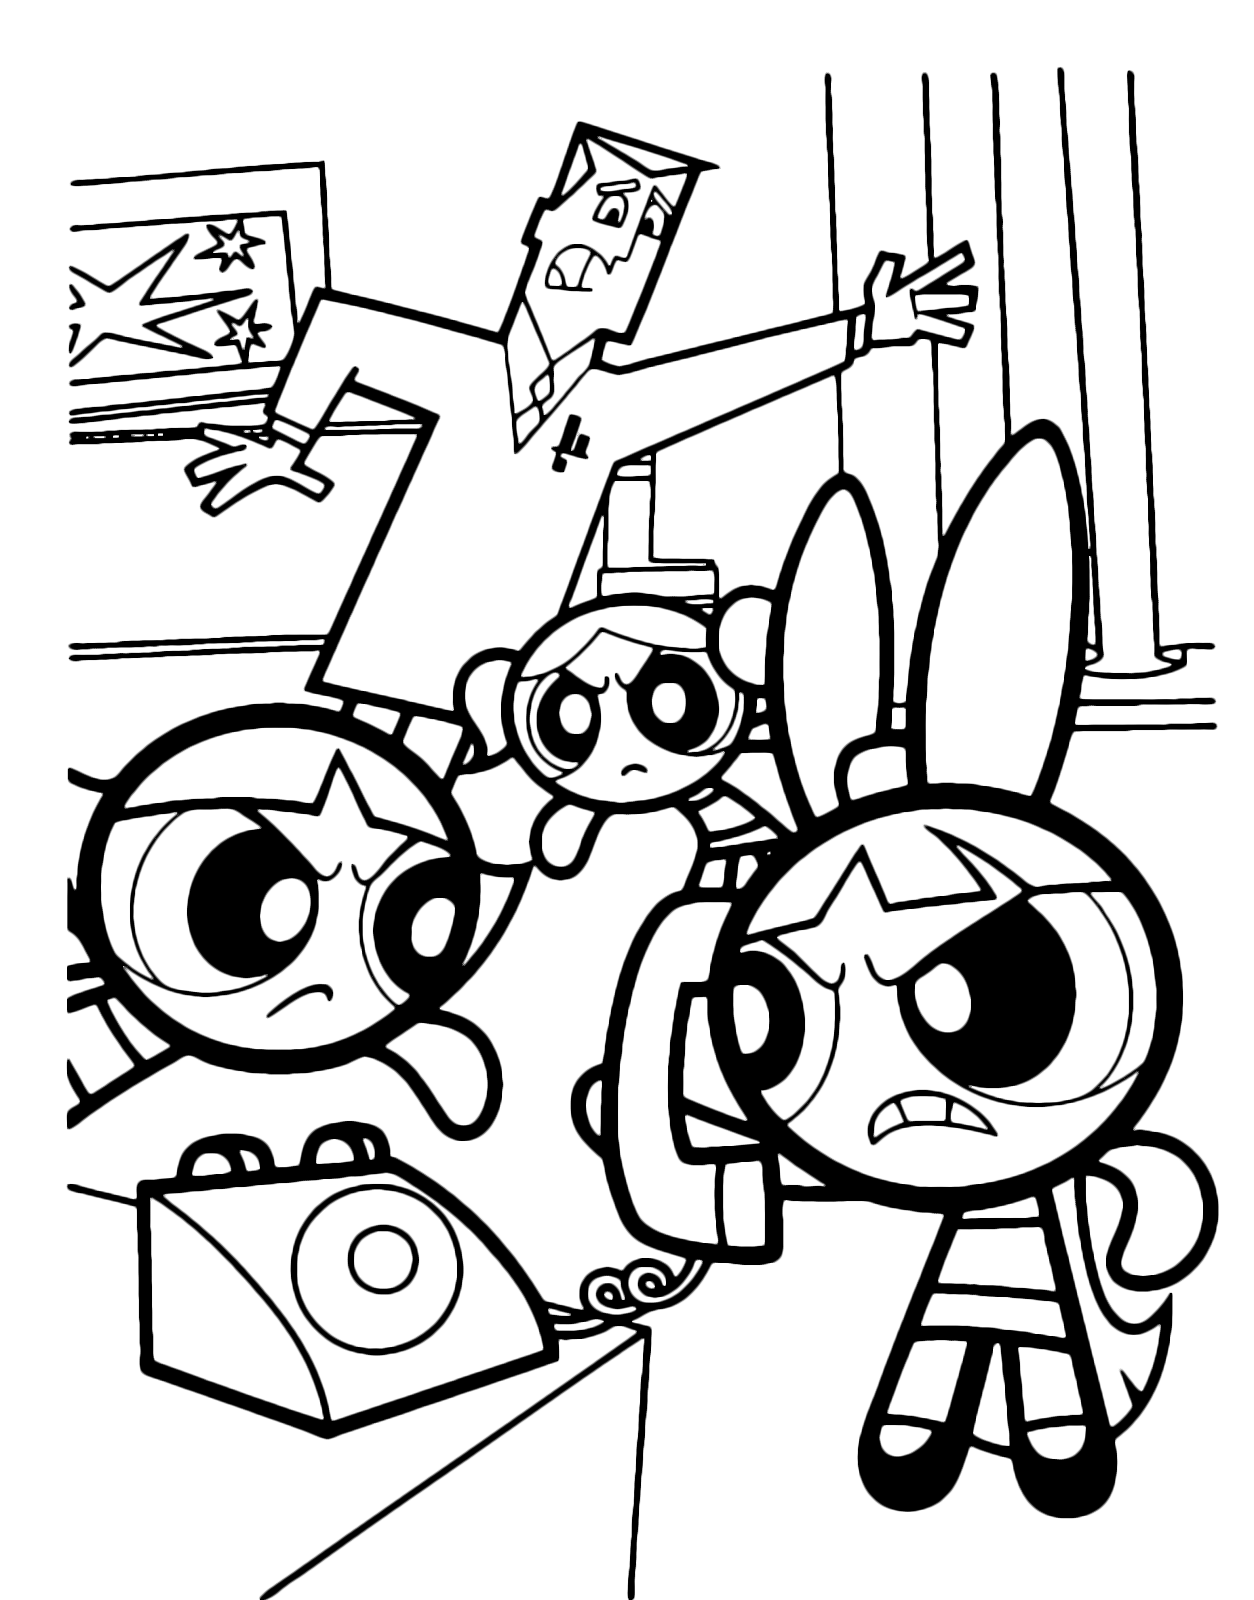 The Powerpuff Girls - Blossom on the phone while Bubbles and Buttercup wait angrily